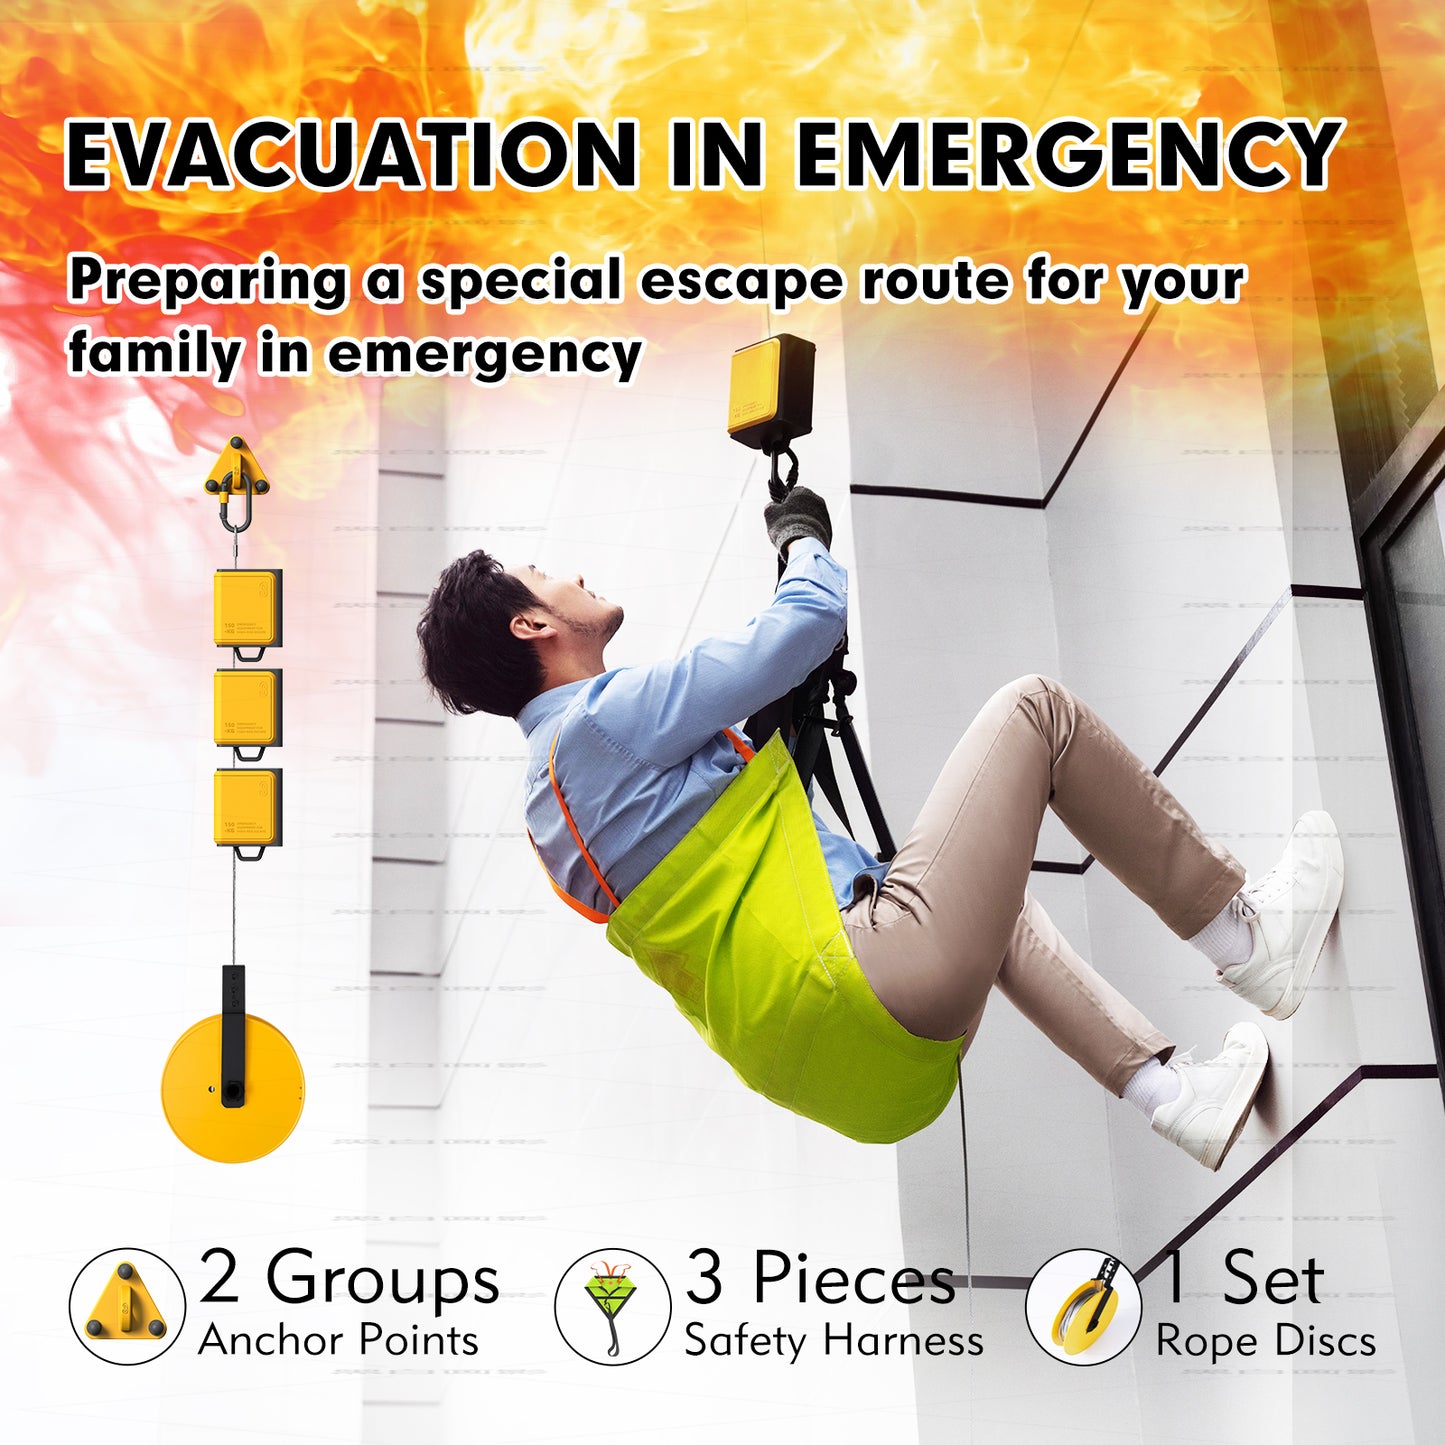 3S LIFT 3-engine version rescue unit, evacuation and rescue unit for family fire escape for 3-6 people, essential for families living in medium to high-rise 195-325 ft for 2-30 floors